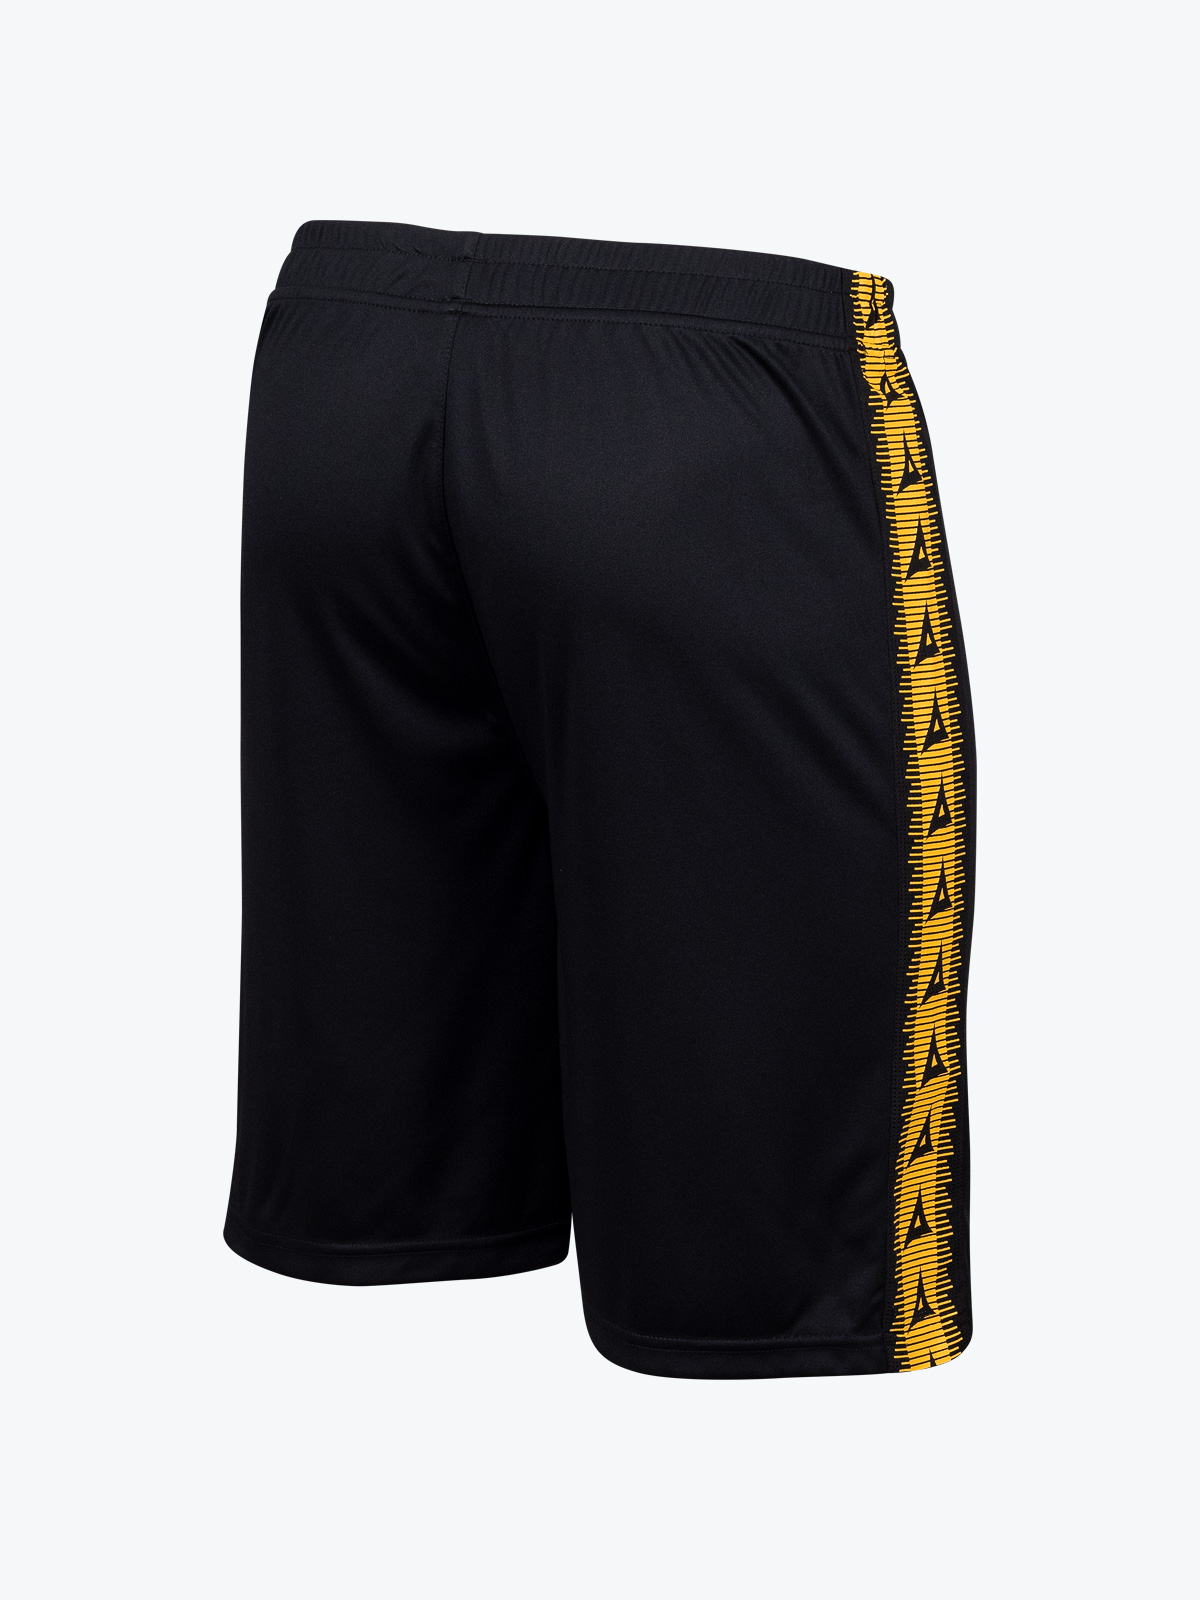 picture of evolve short - black/yel